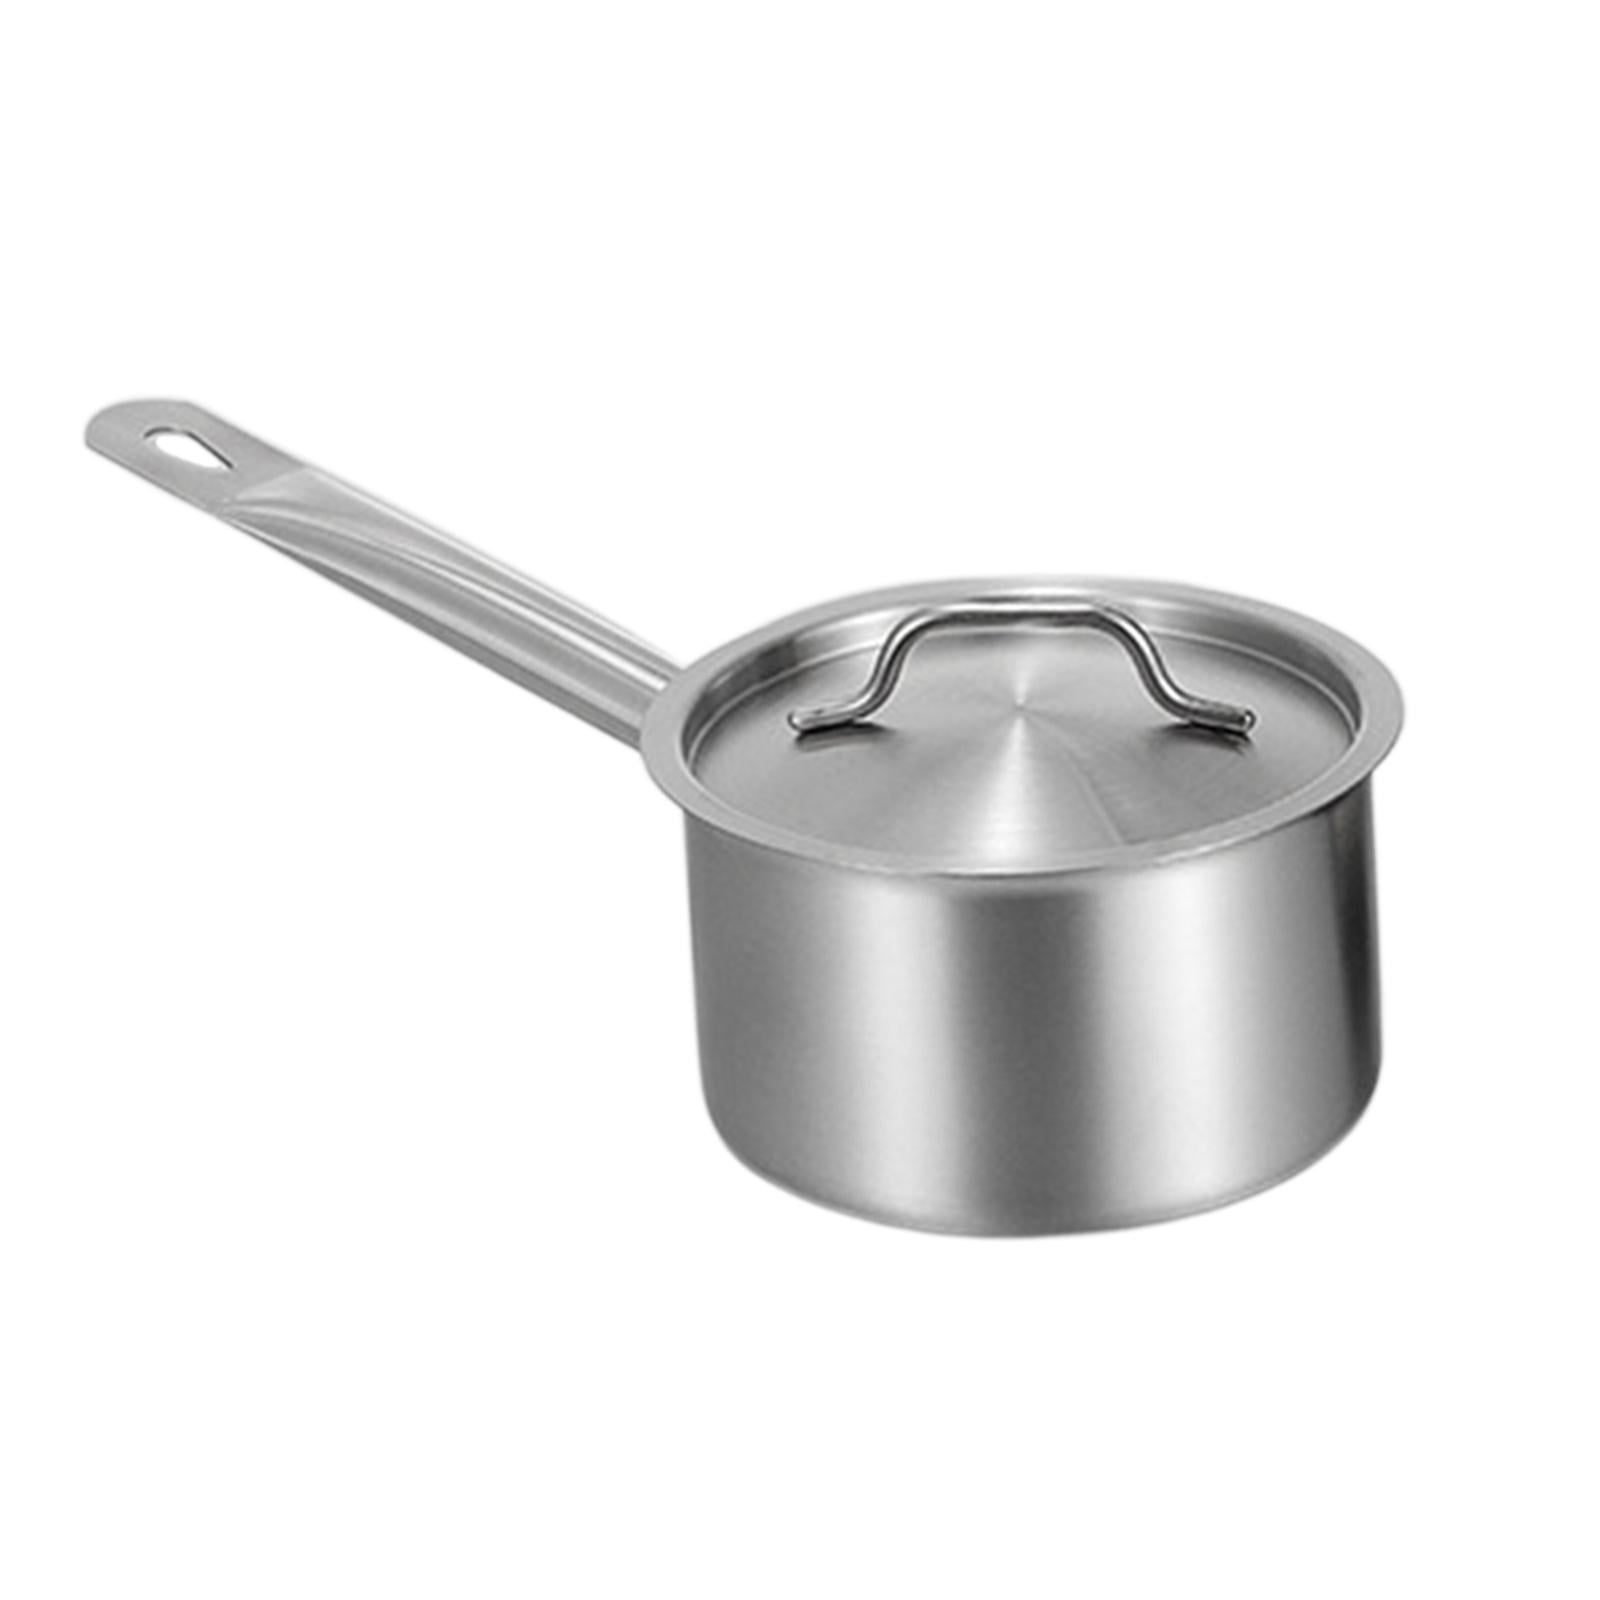 Stainless Steel Tea Pan, For Home, Packaging Type: Box